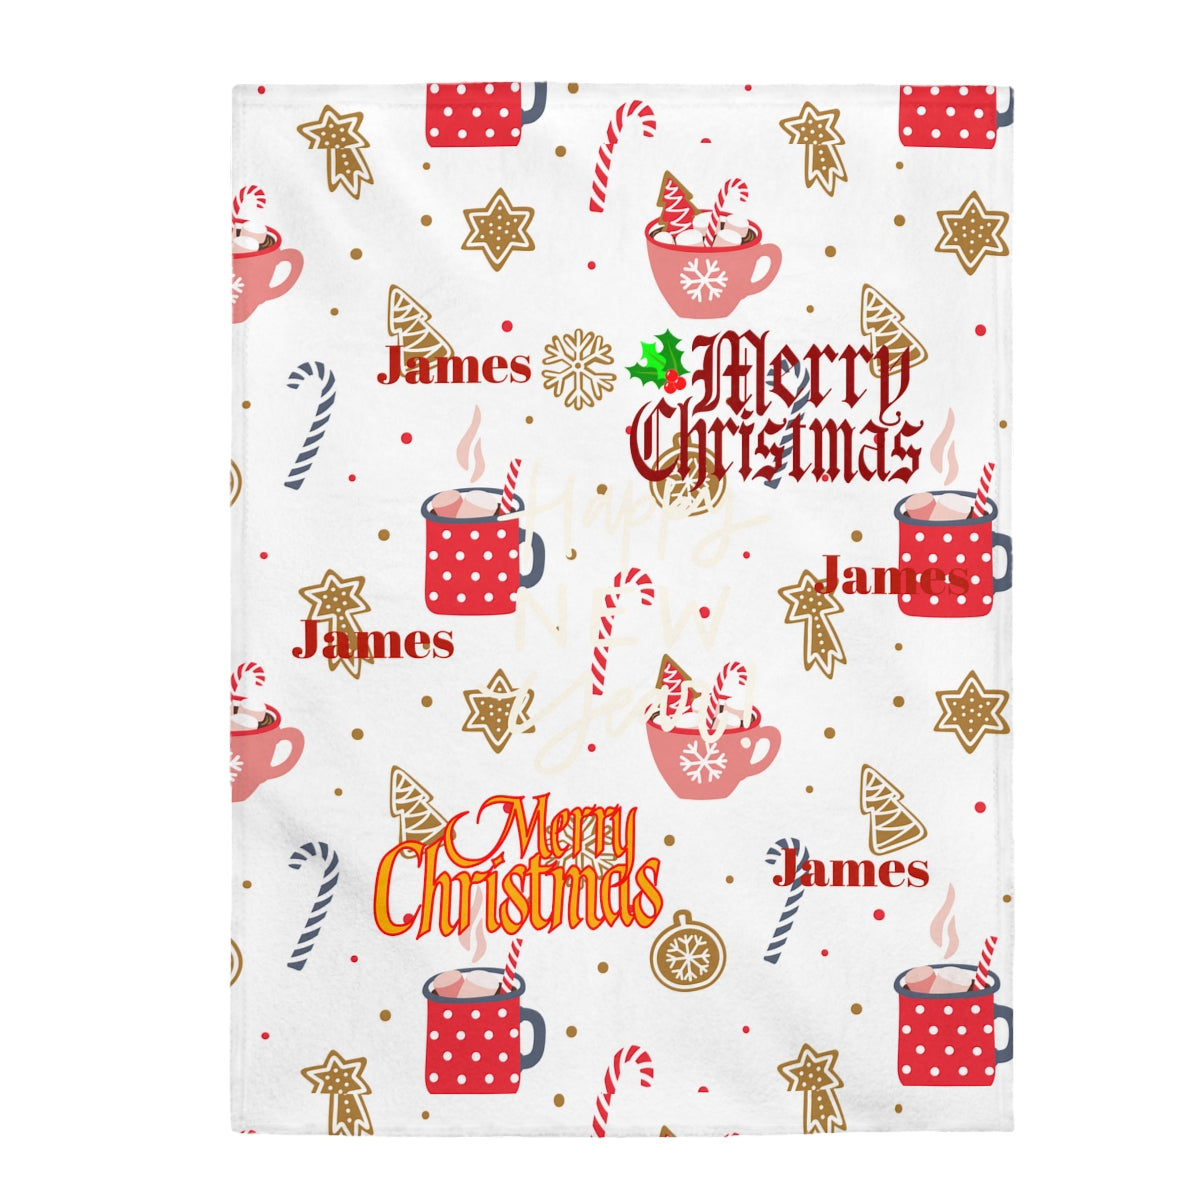 Kids Throw Blankets Personalised, Merry Christmas Theme, Baby Blanket, Plush Veveteen Super Soft Cozy Throw Blankets, 3 Sizes